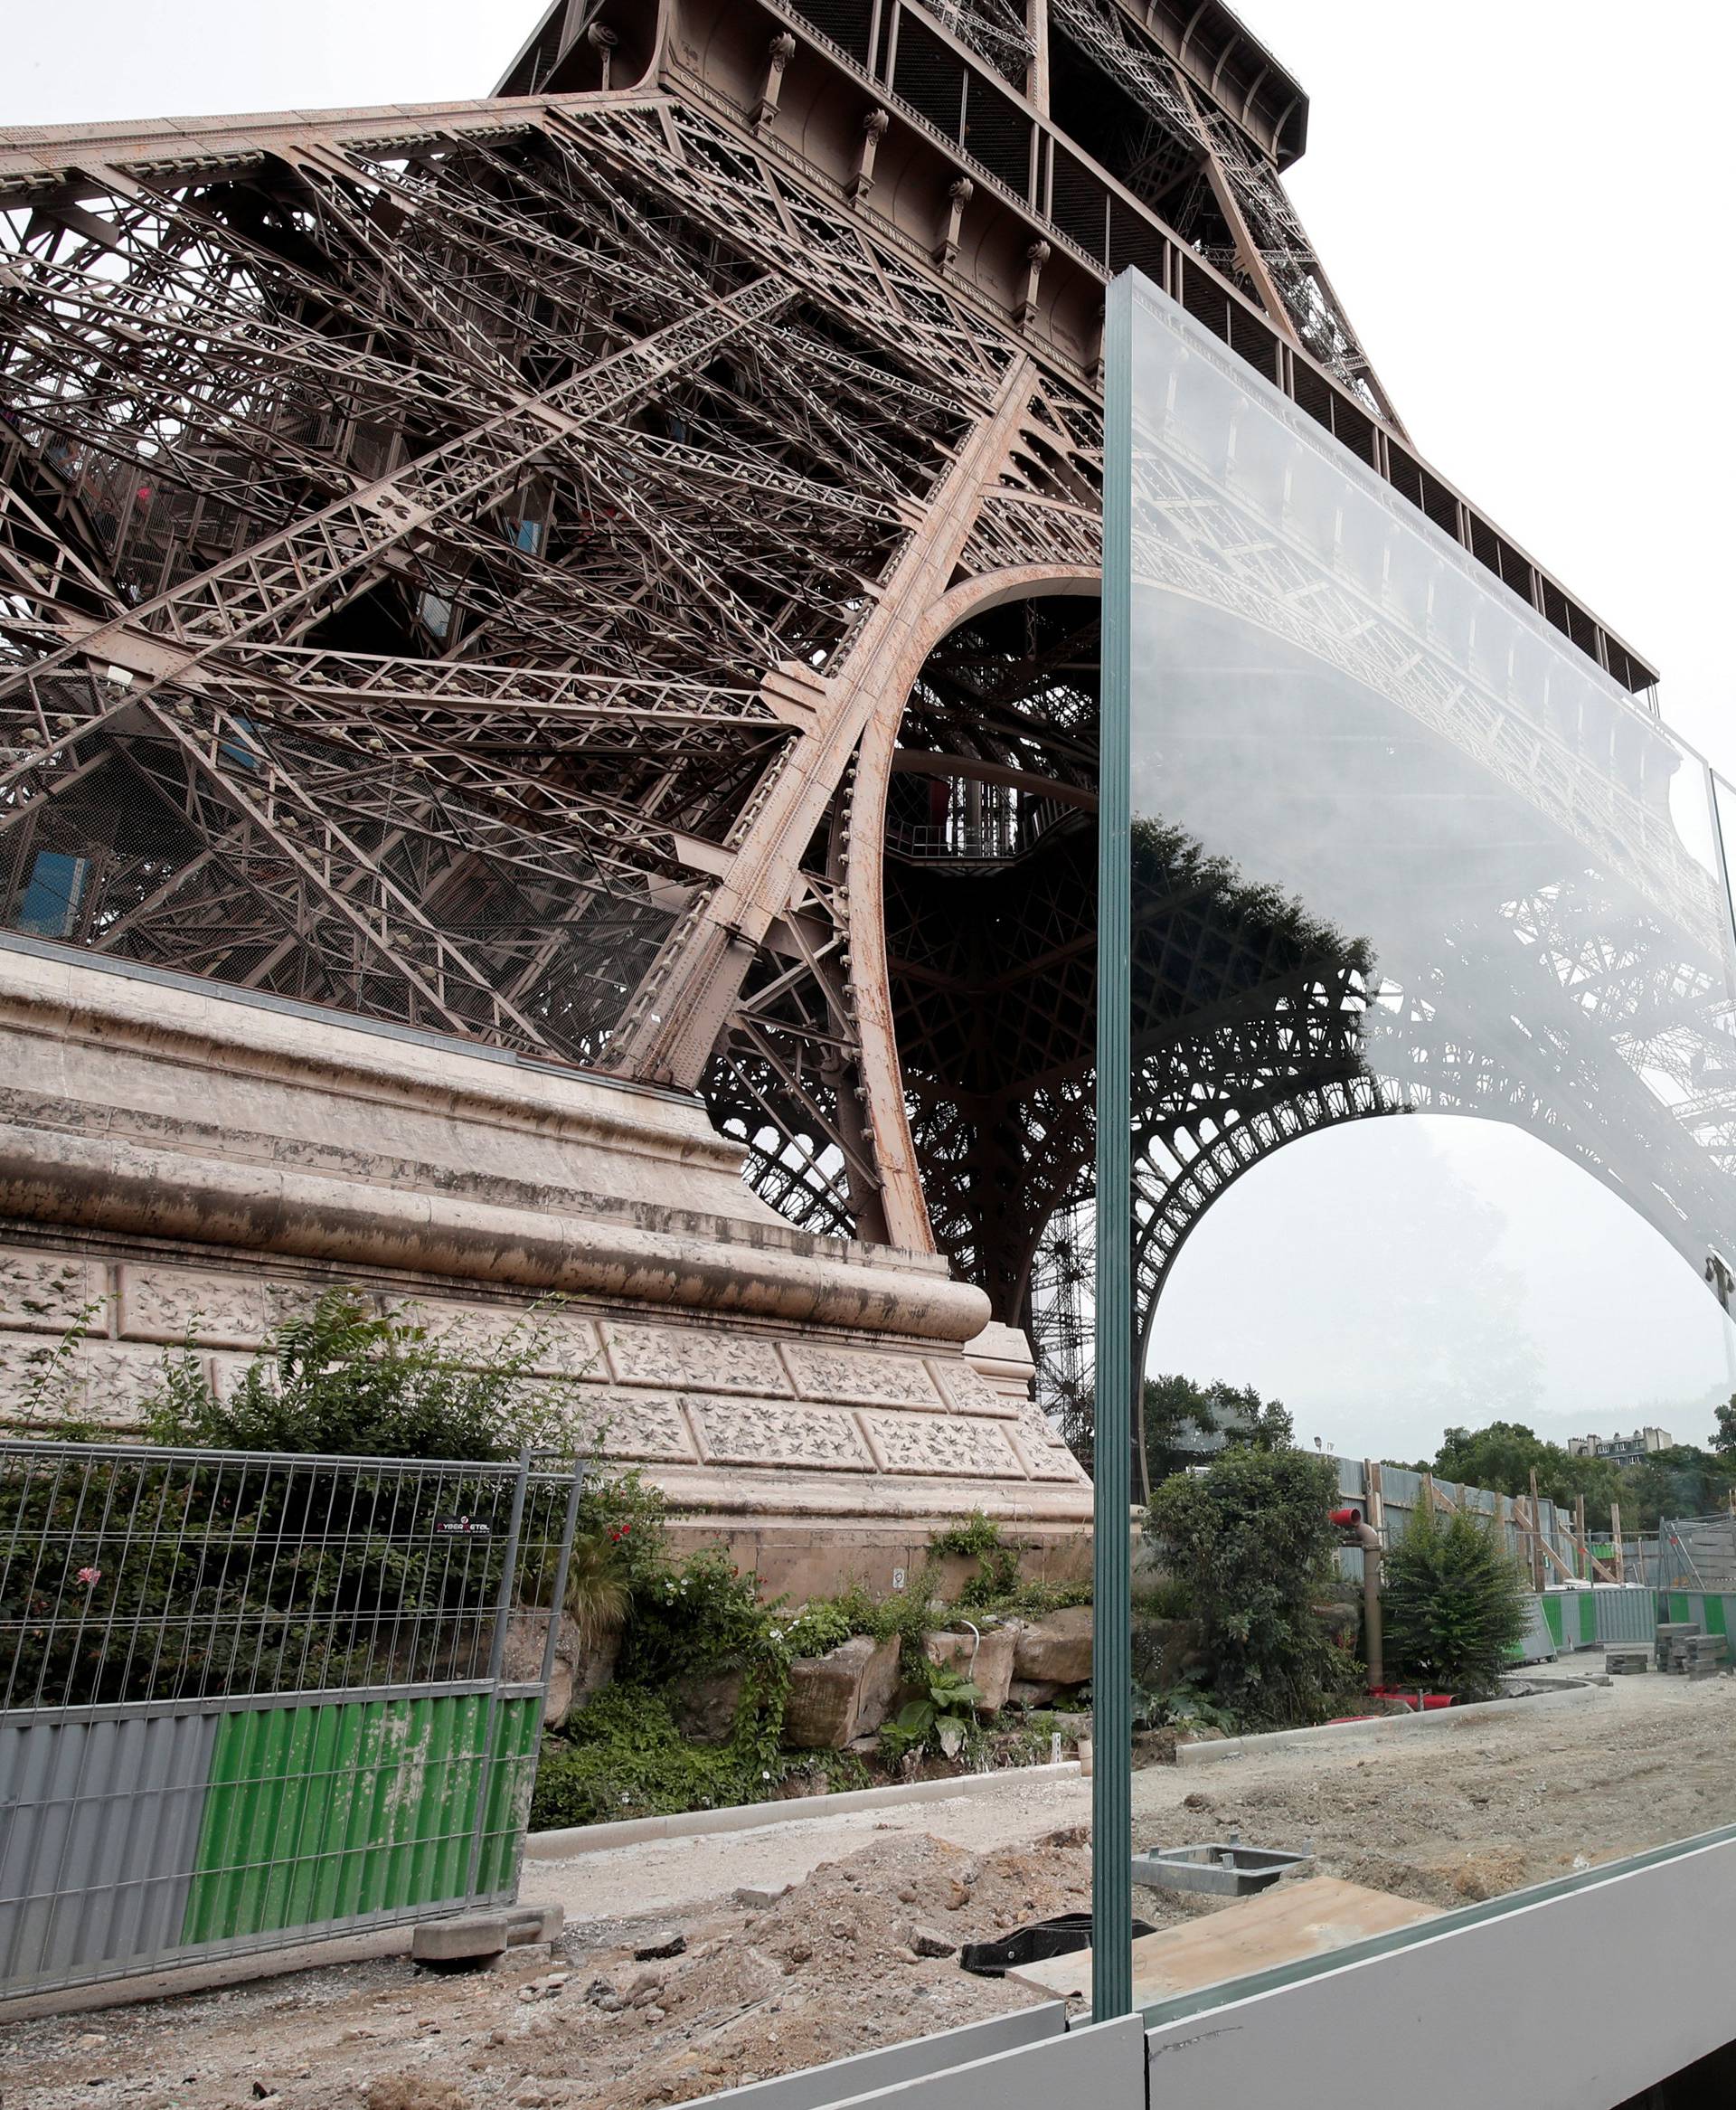 A member of the media makes images of the new glass security fence which is under construction around the Eiffel Tower in Paris